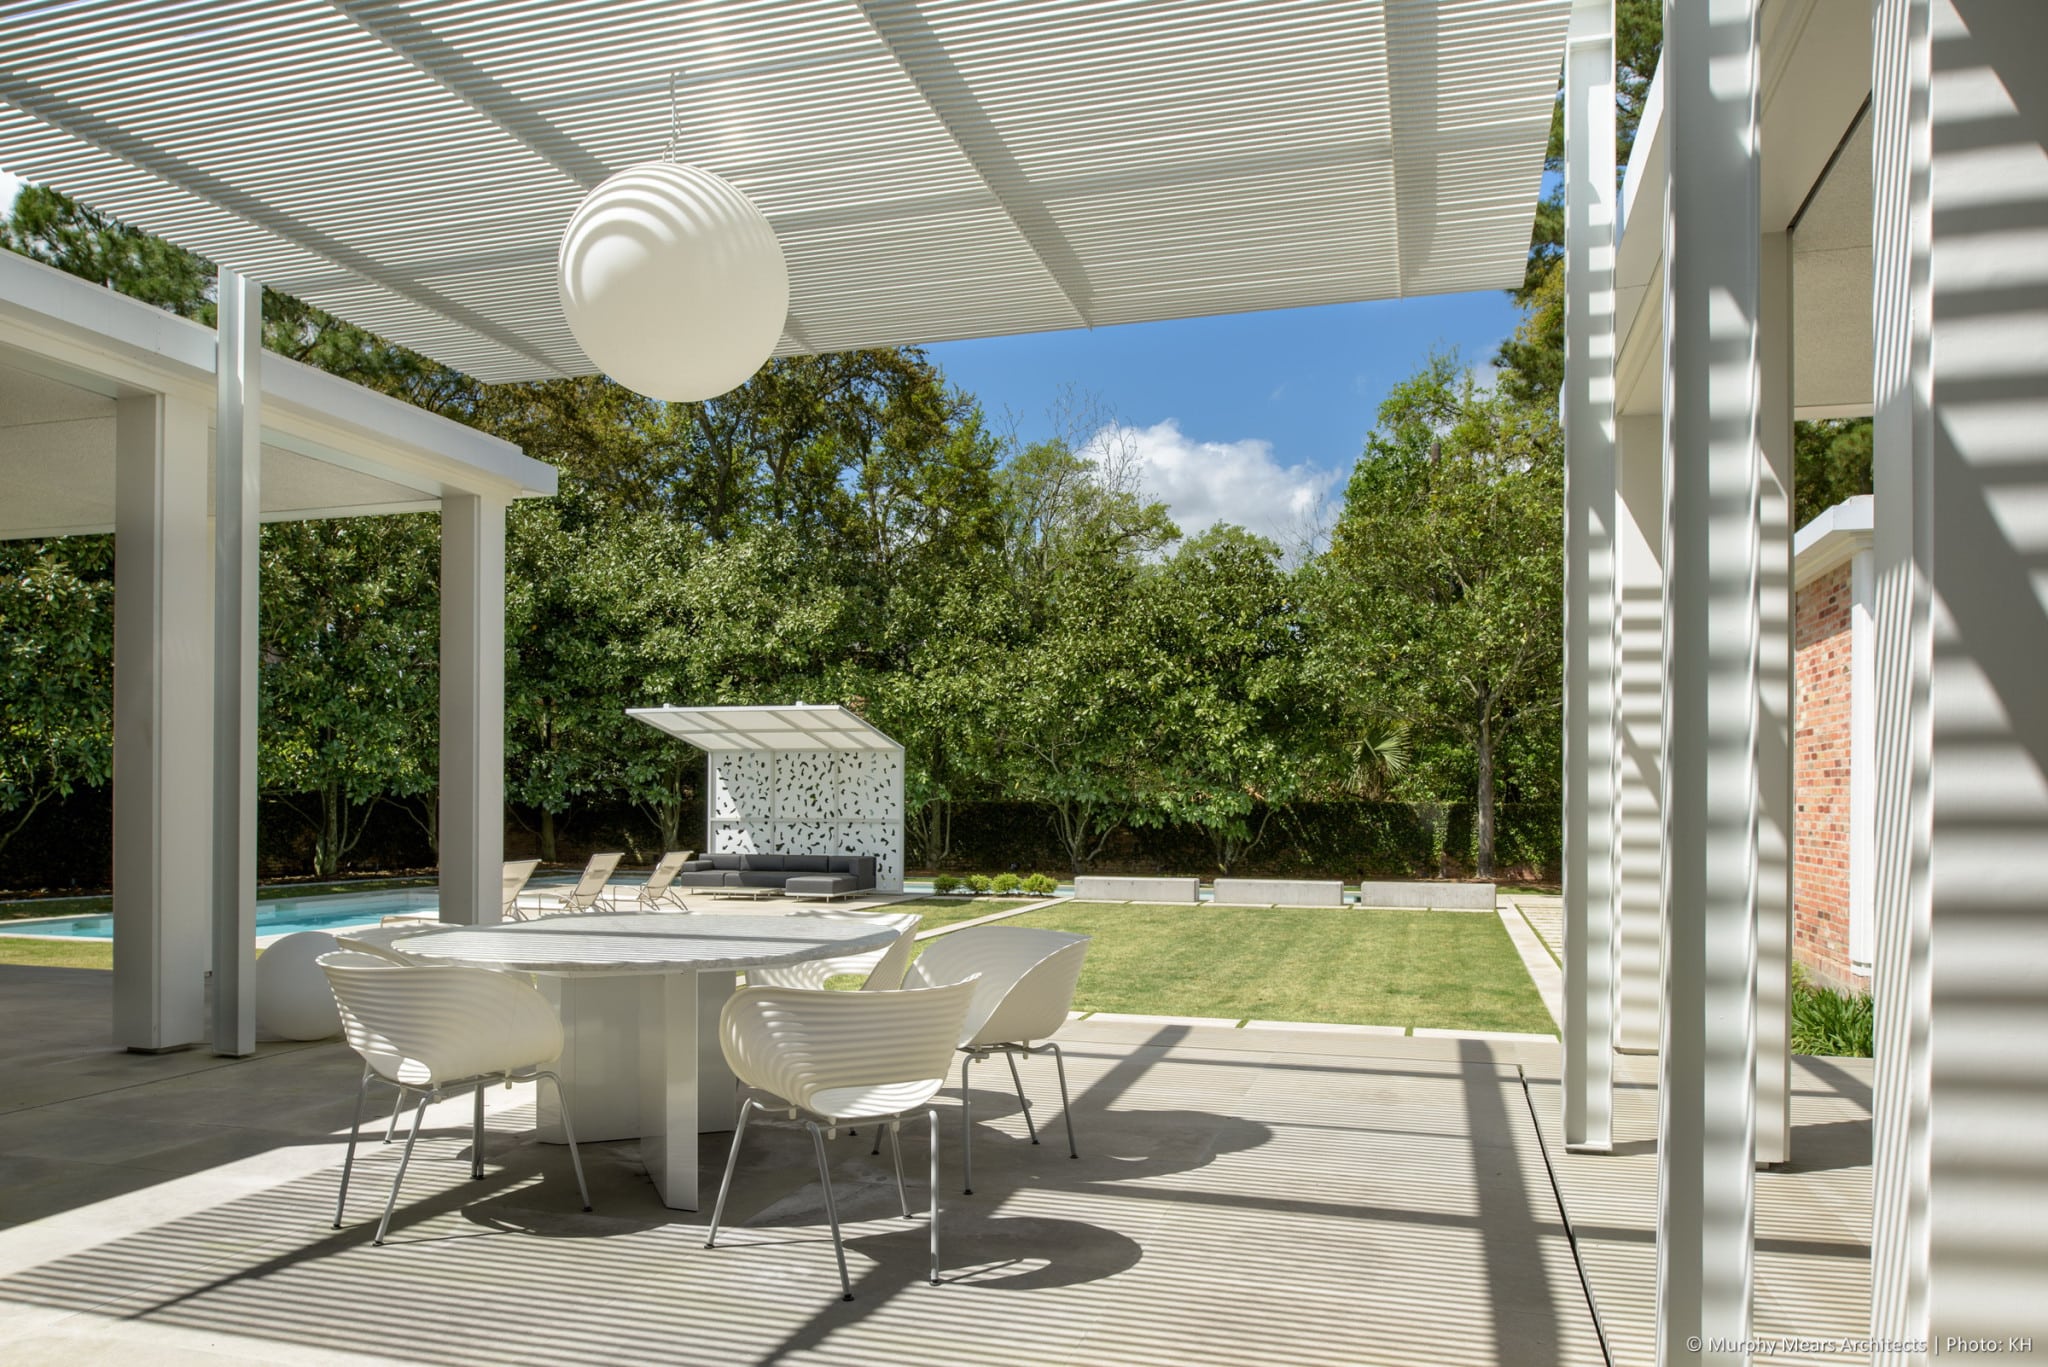 Outdoor dining area beneath the aluminum and steel trellis, overlooking the central lawn, with the pool terrace shade canopy beyond.